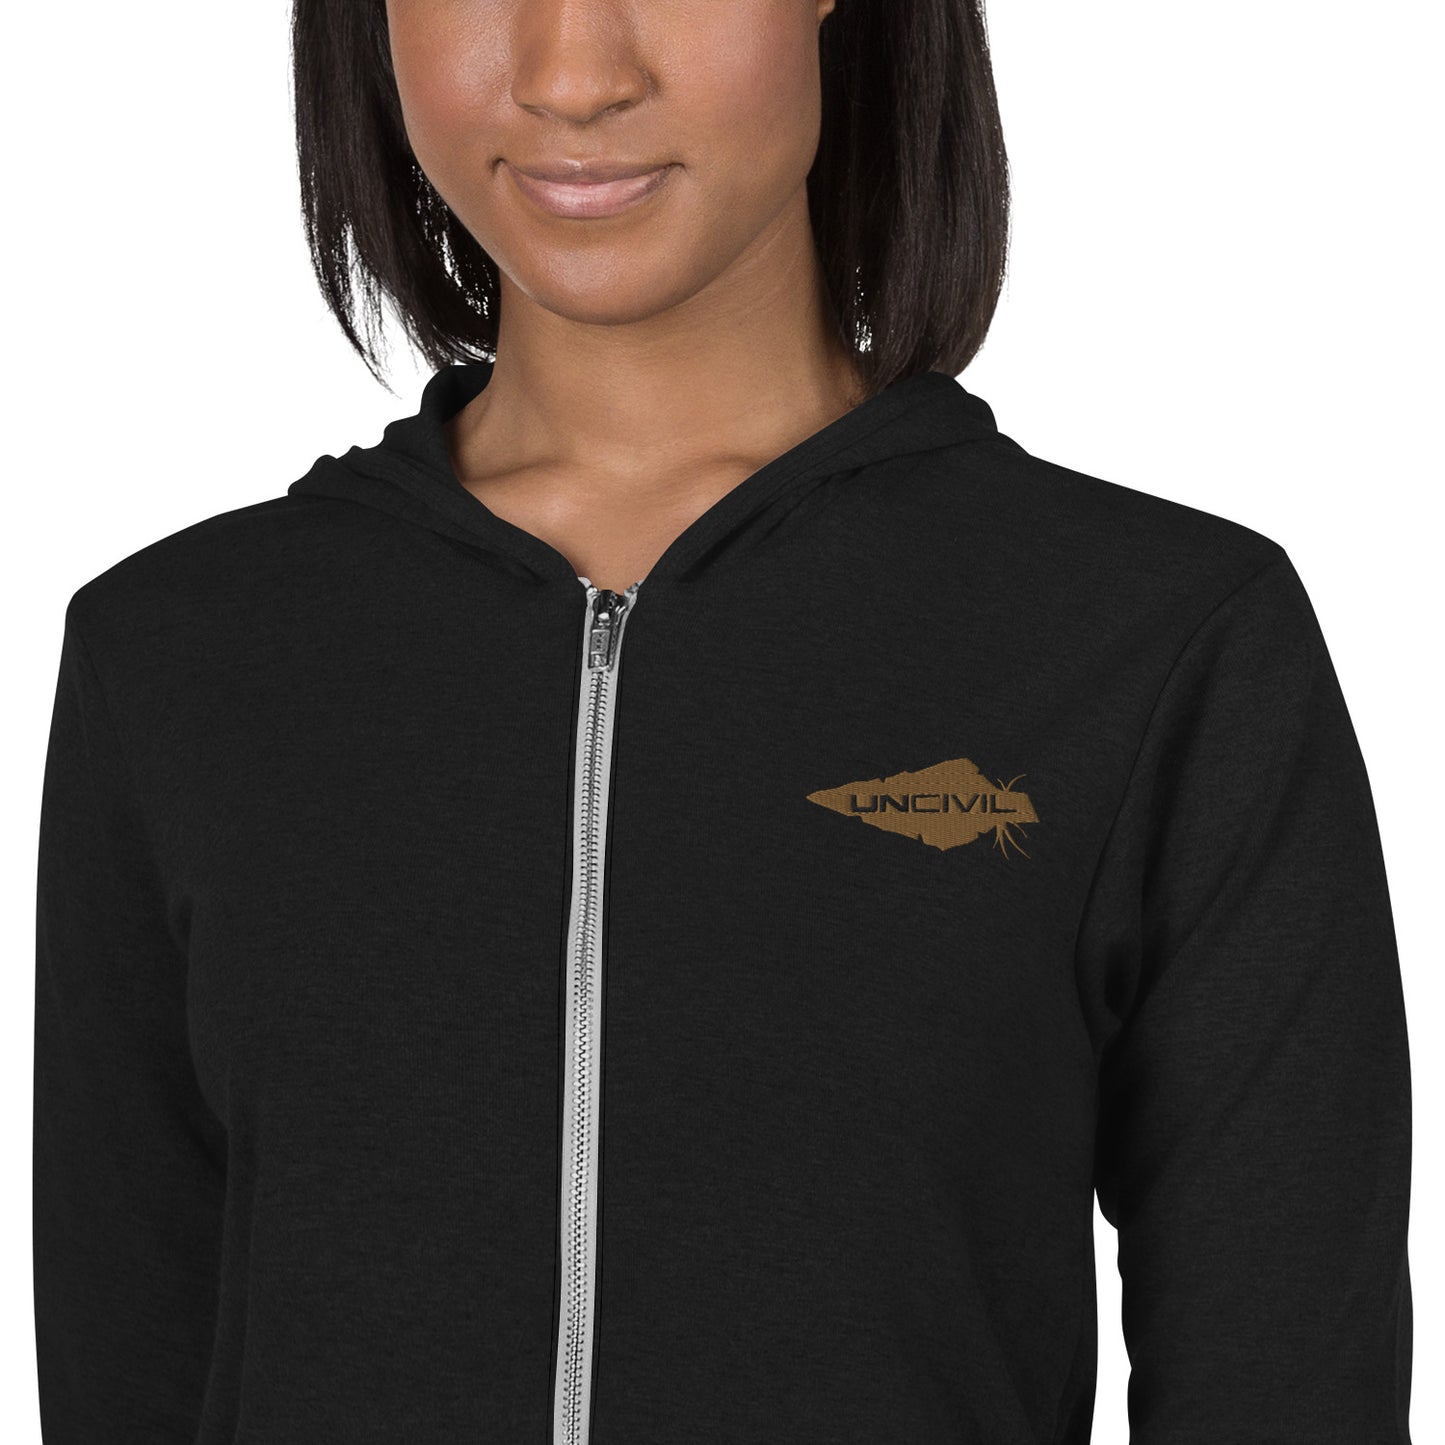 Black UNCIVIL Lightweight Hoodie features our gold uncivil spear.  It is lightweight unisex zip hoodie has a modern fit, hood, front zip, and a kangaroo pocket is the way to go.